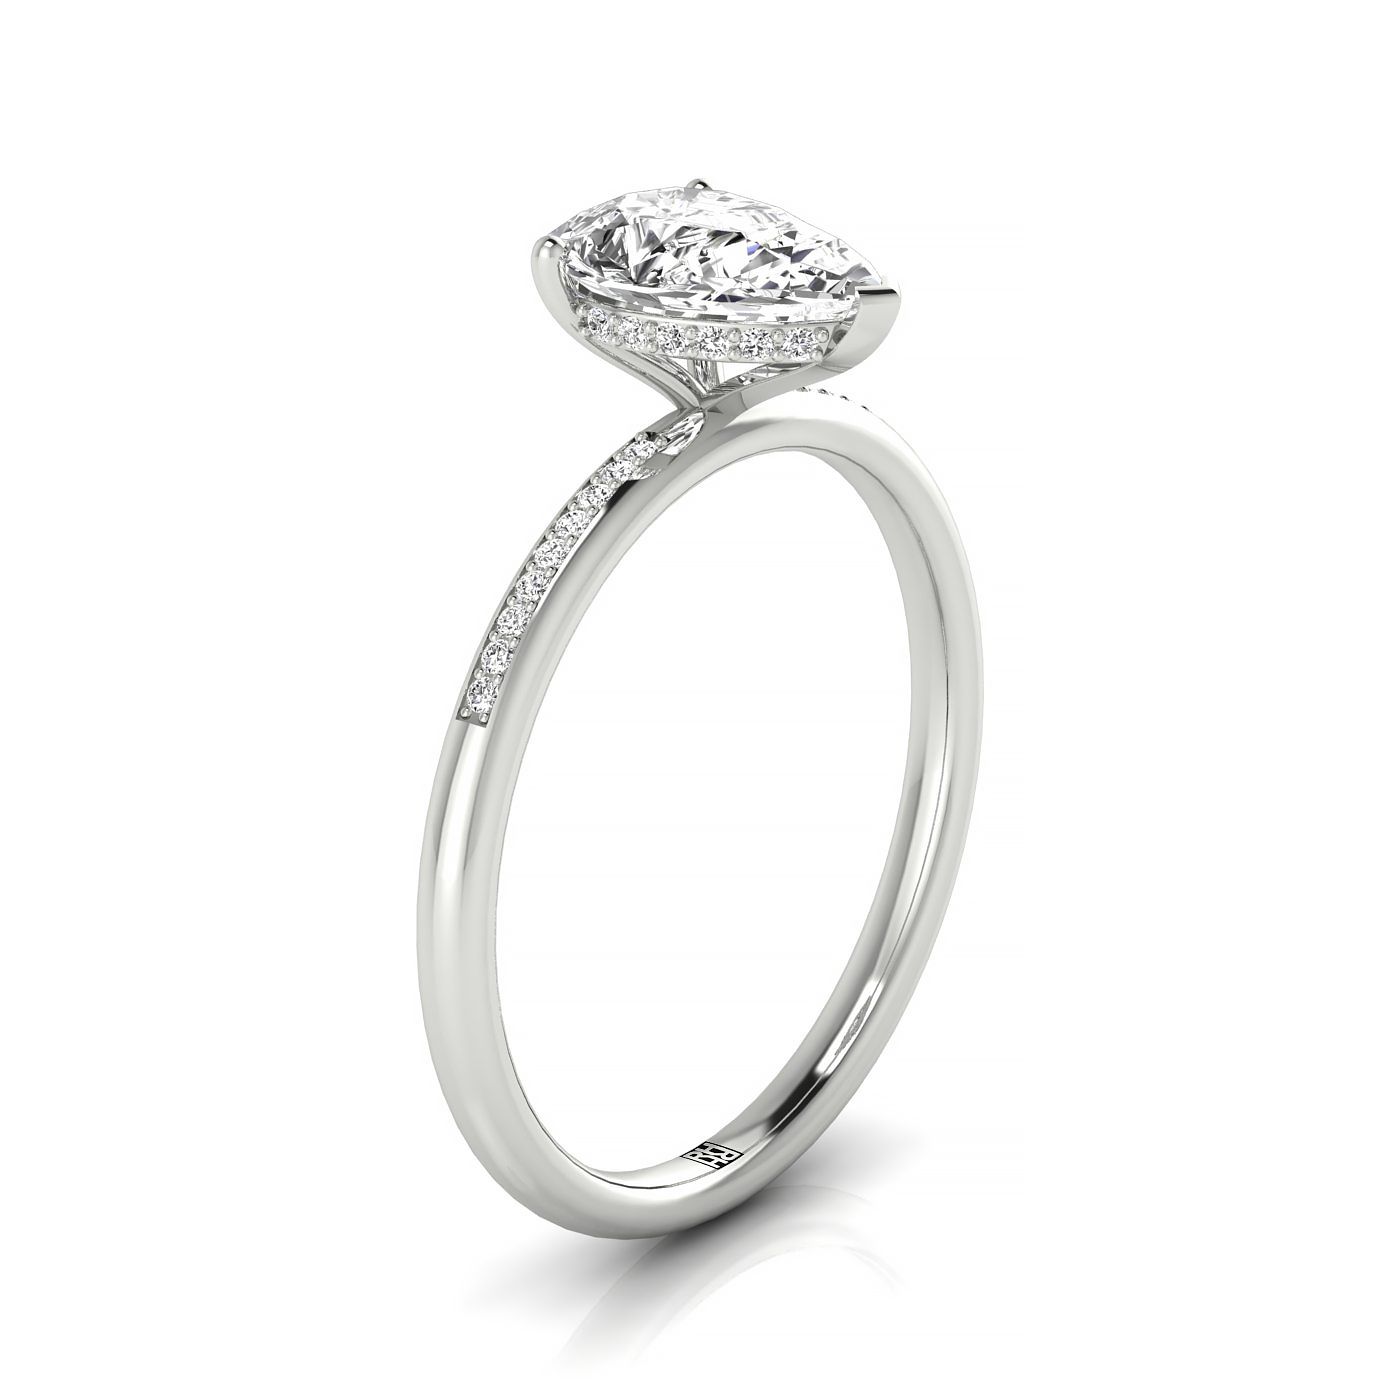 Plat Pear Engagement Ring With High Hidden Halo With 35 Prong Set Round Diamonds